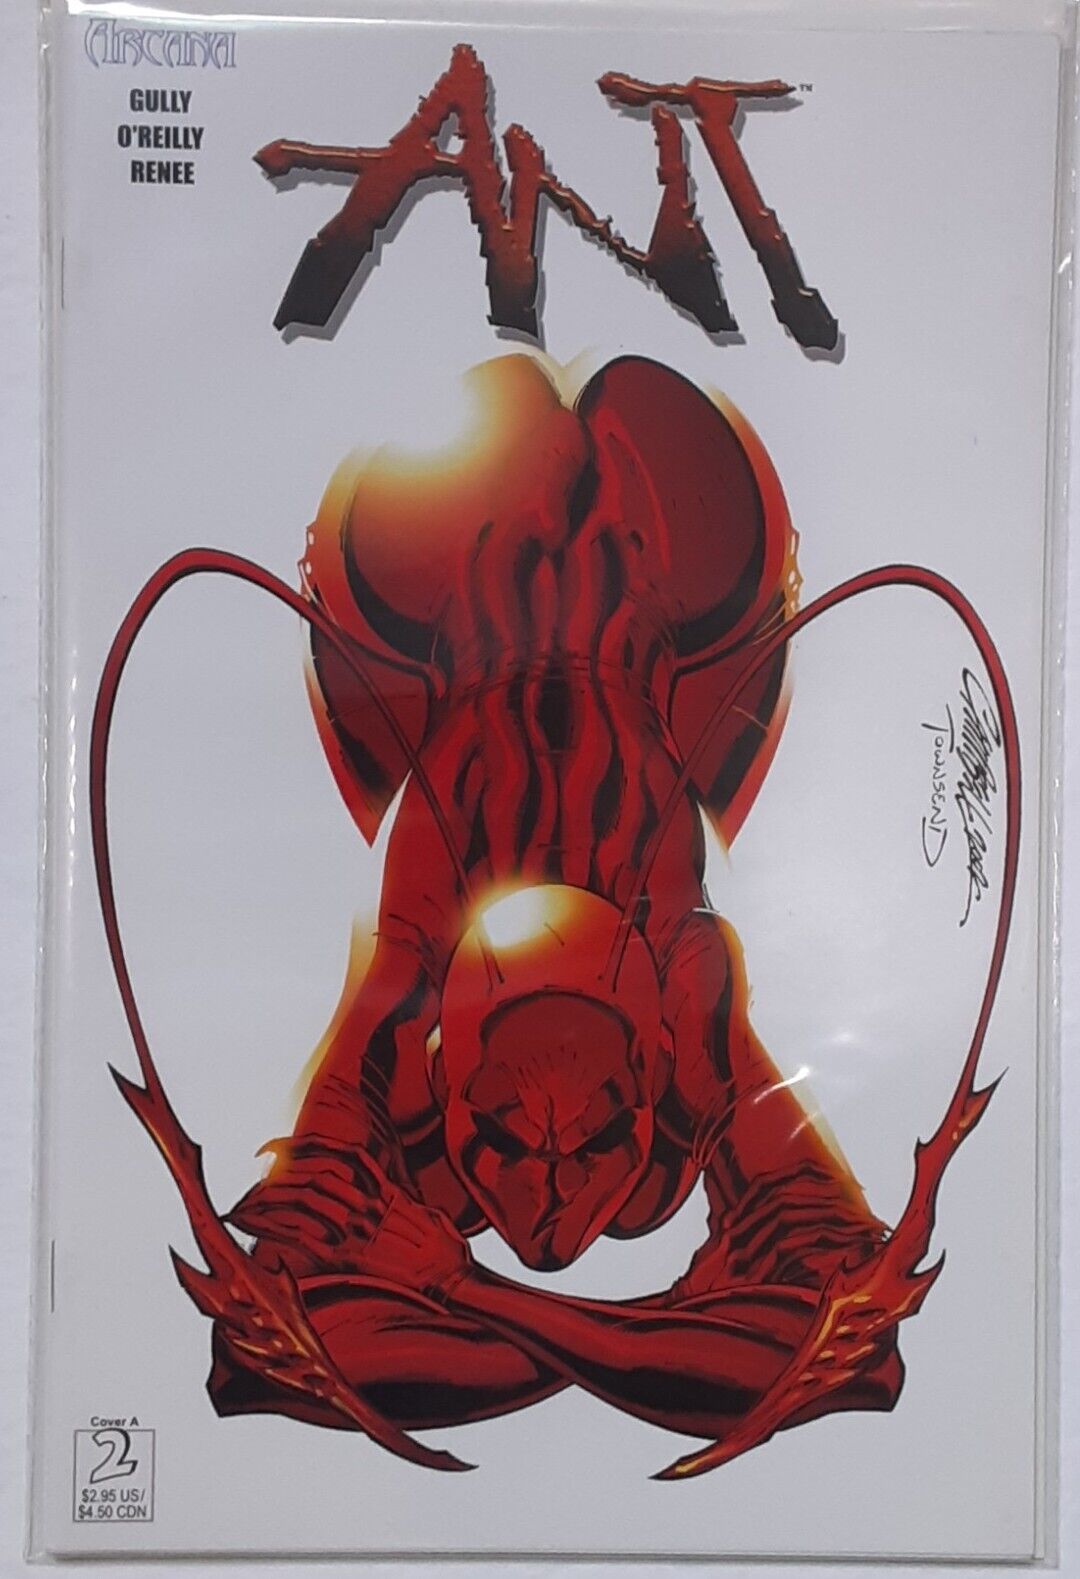 ANT 2 A J. SCOTT CAMPBELL COVER LOW PRINT RUN🔥UNTOUCHED/UNREAD CONDITION🔥2004